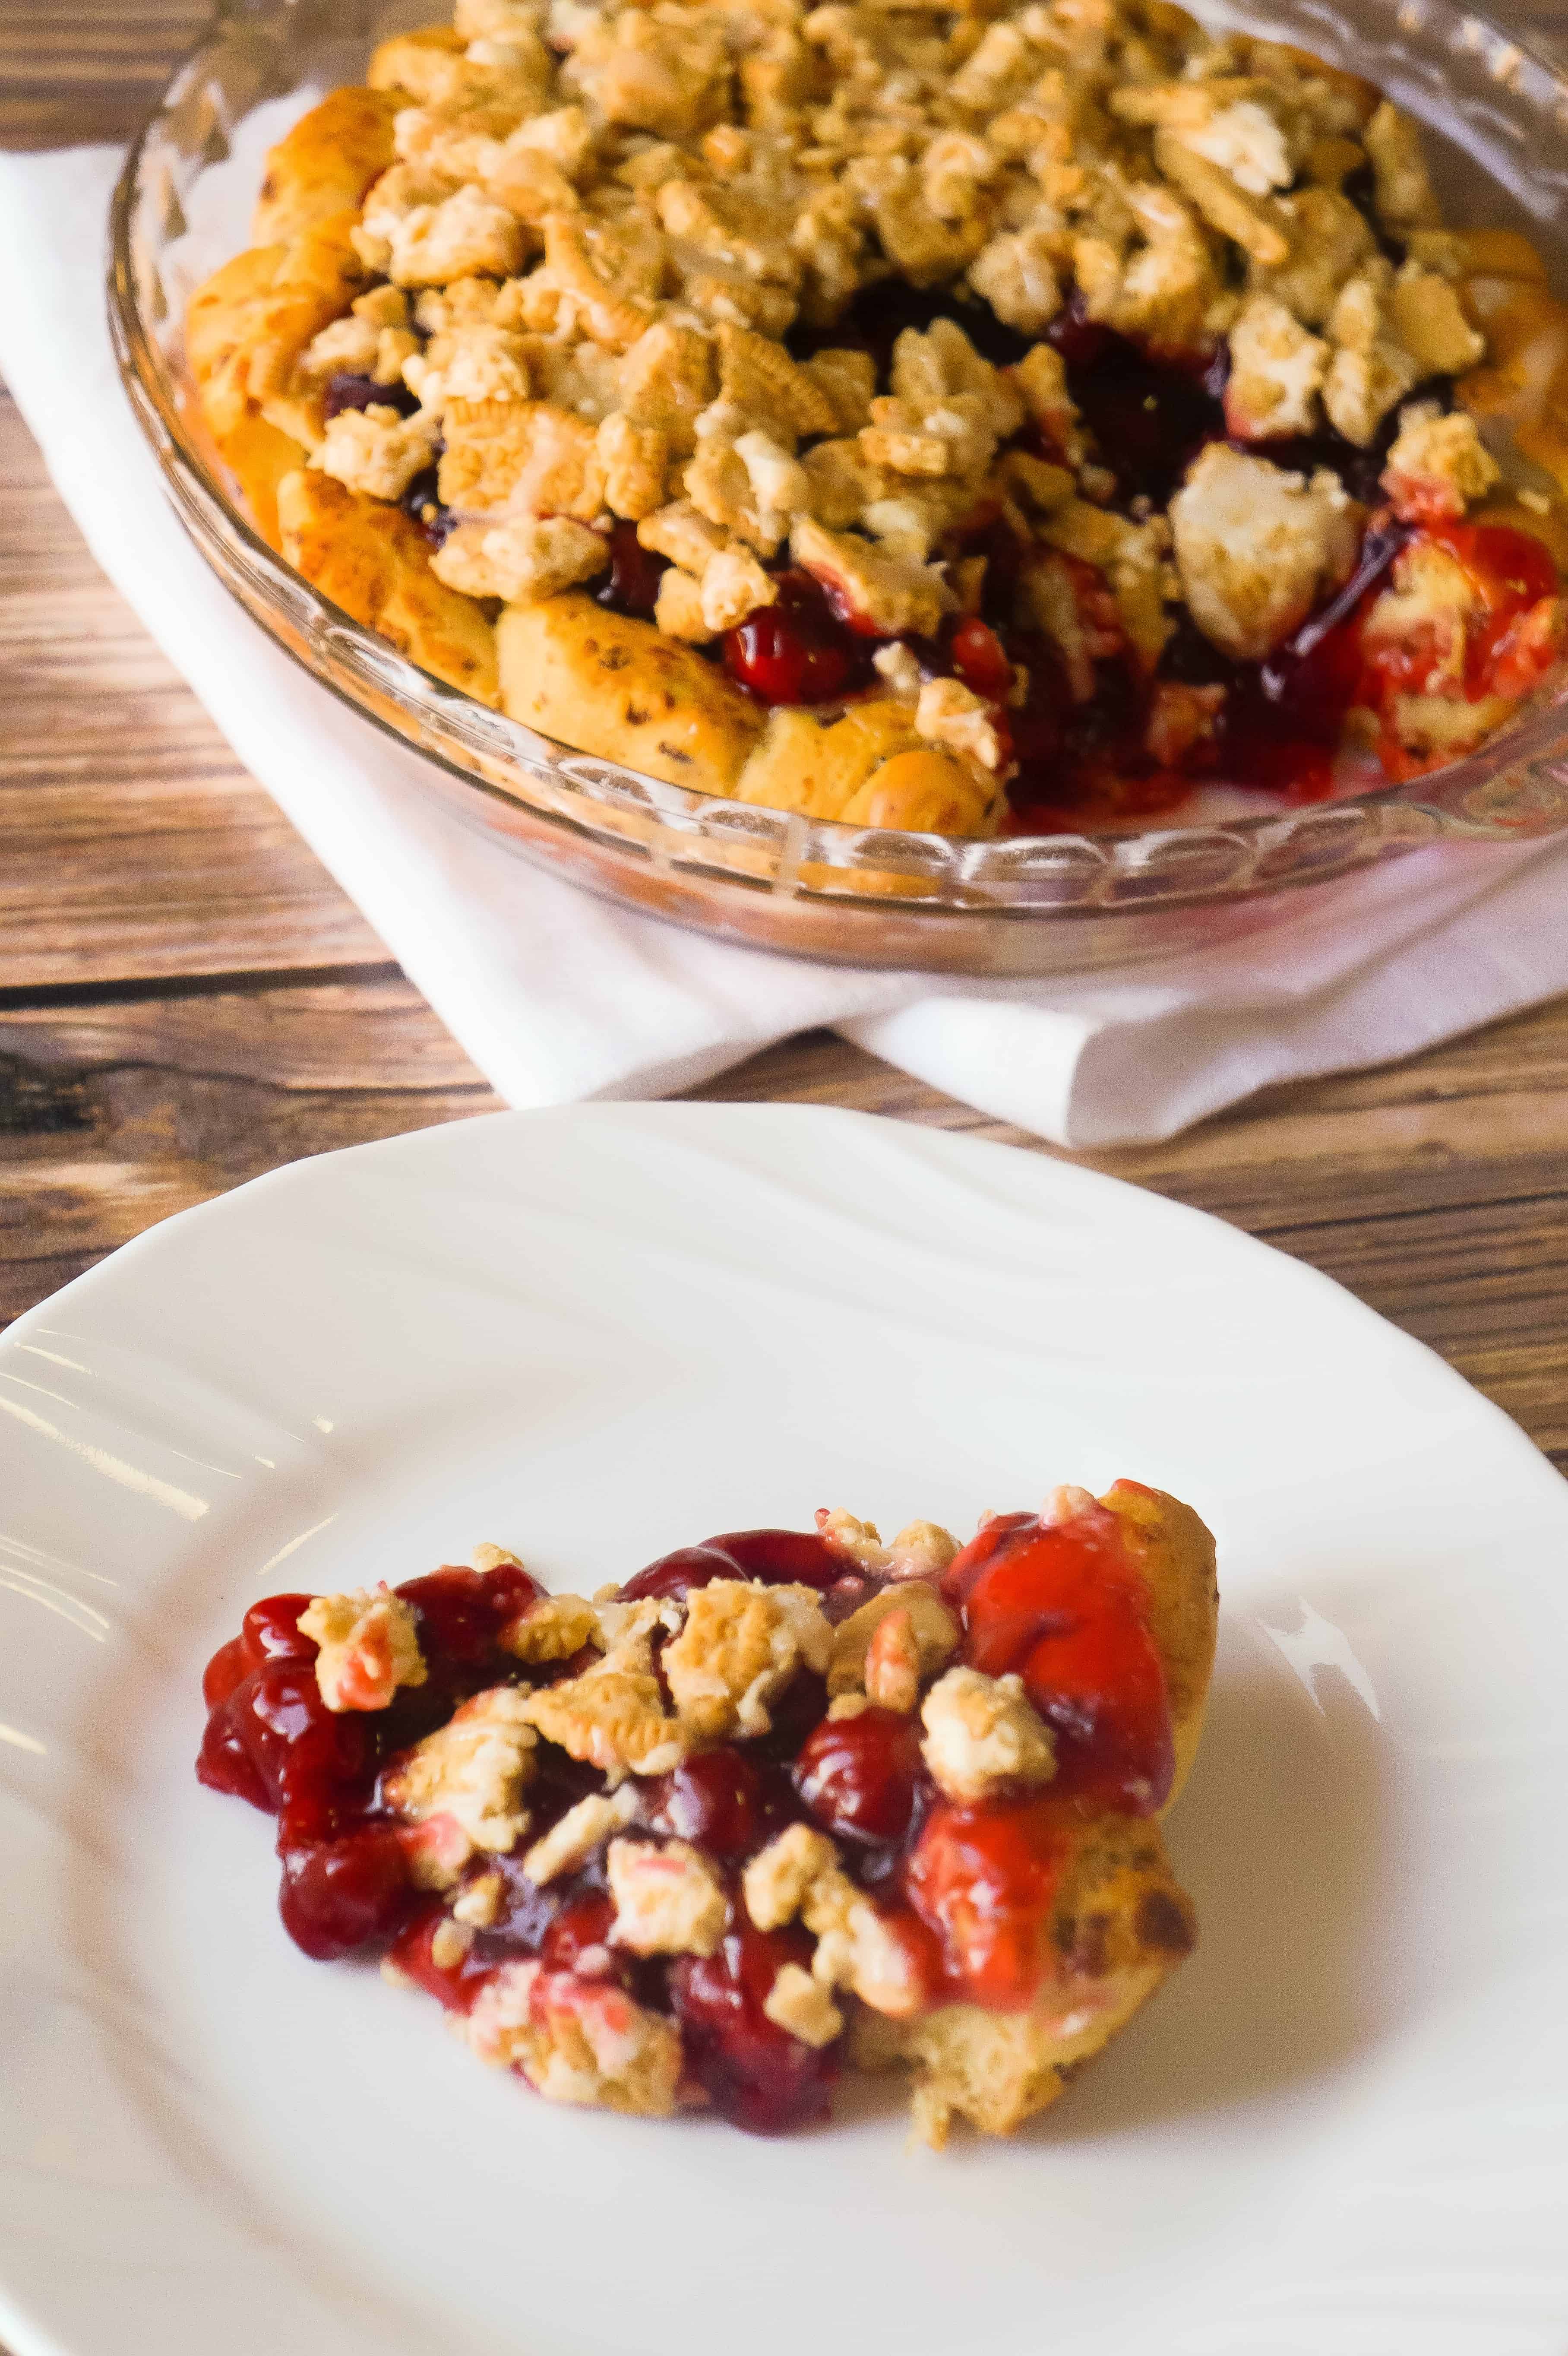 Cinnamon Bun Cherry Pie is an easy pie recipe using Pillsbury Cinnamon Rolls and canned cherry pie filling. This cherry pie is topped with crumbled Cinnamon Bun Oreos.